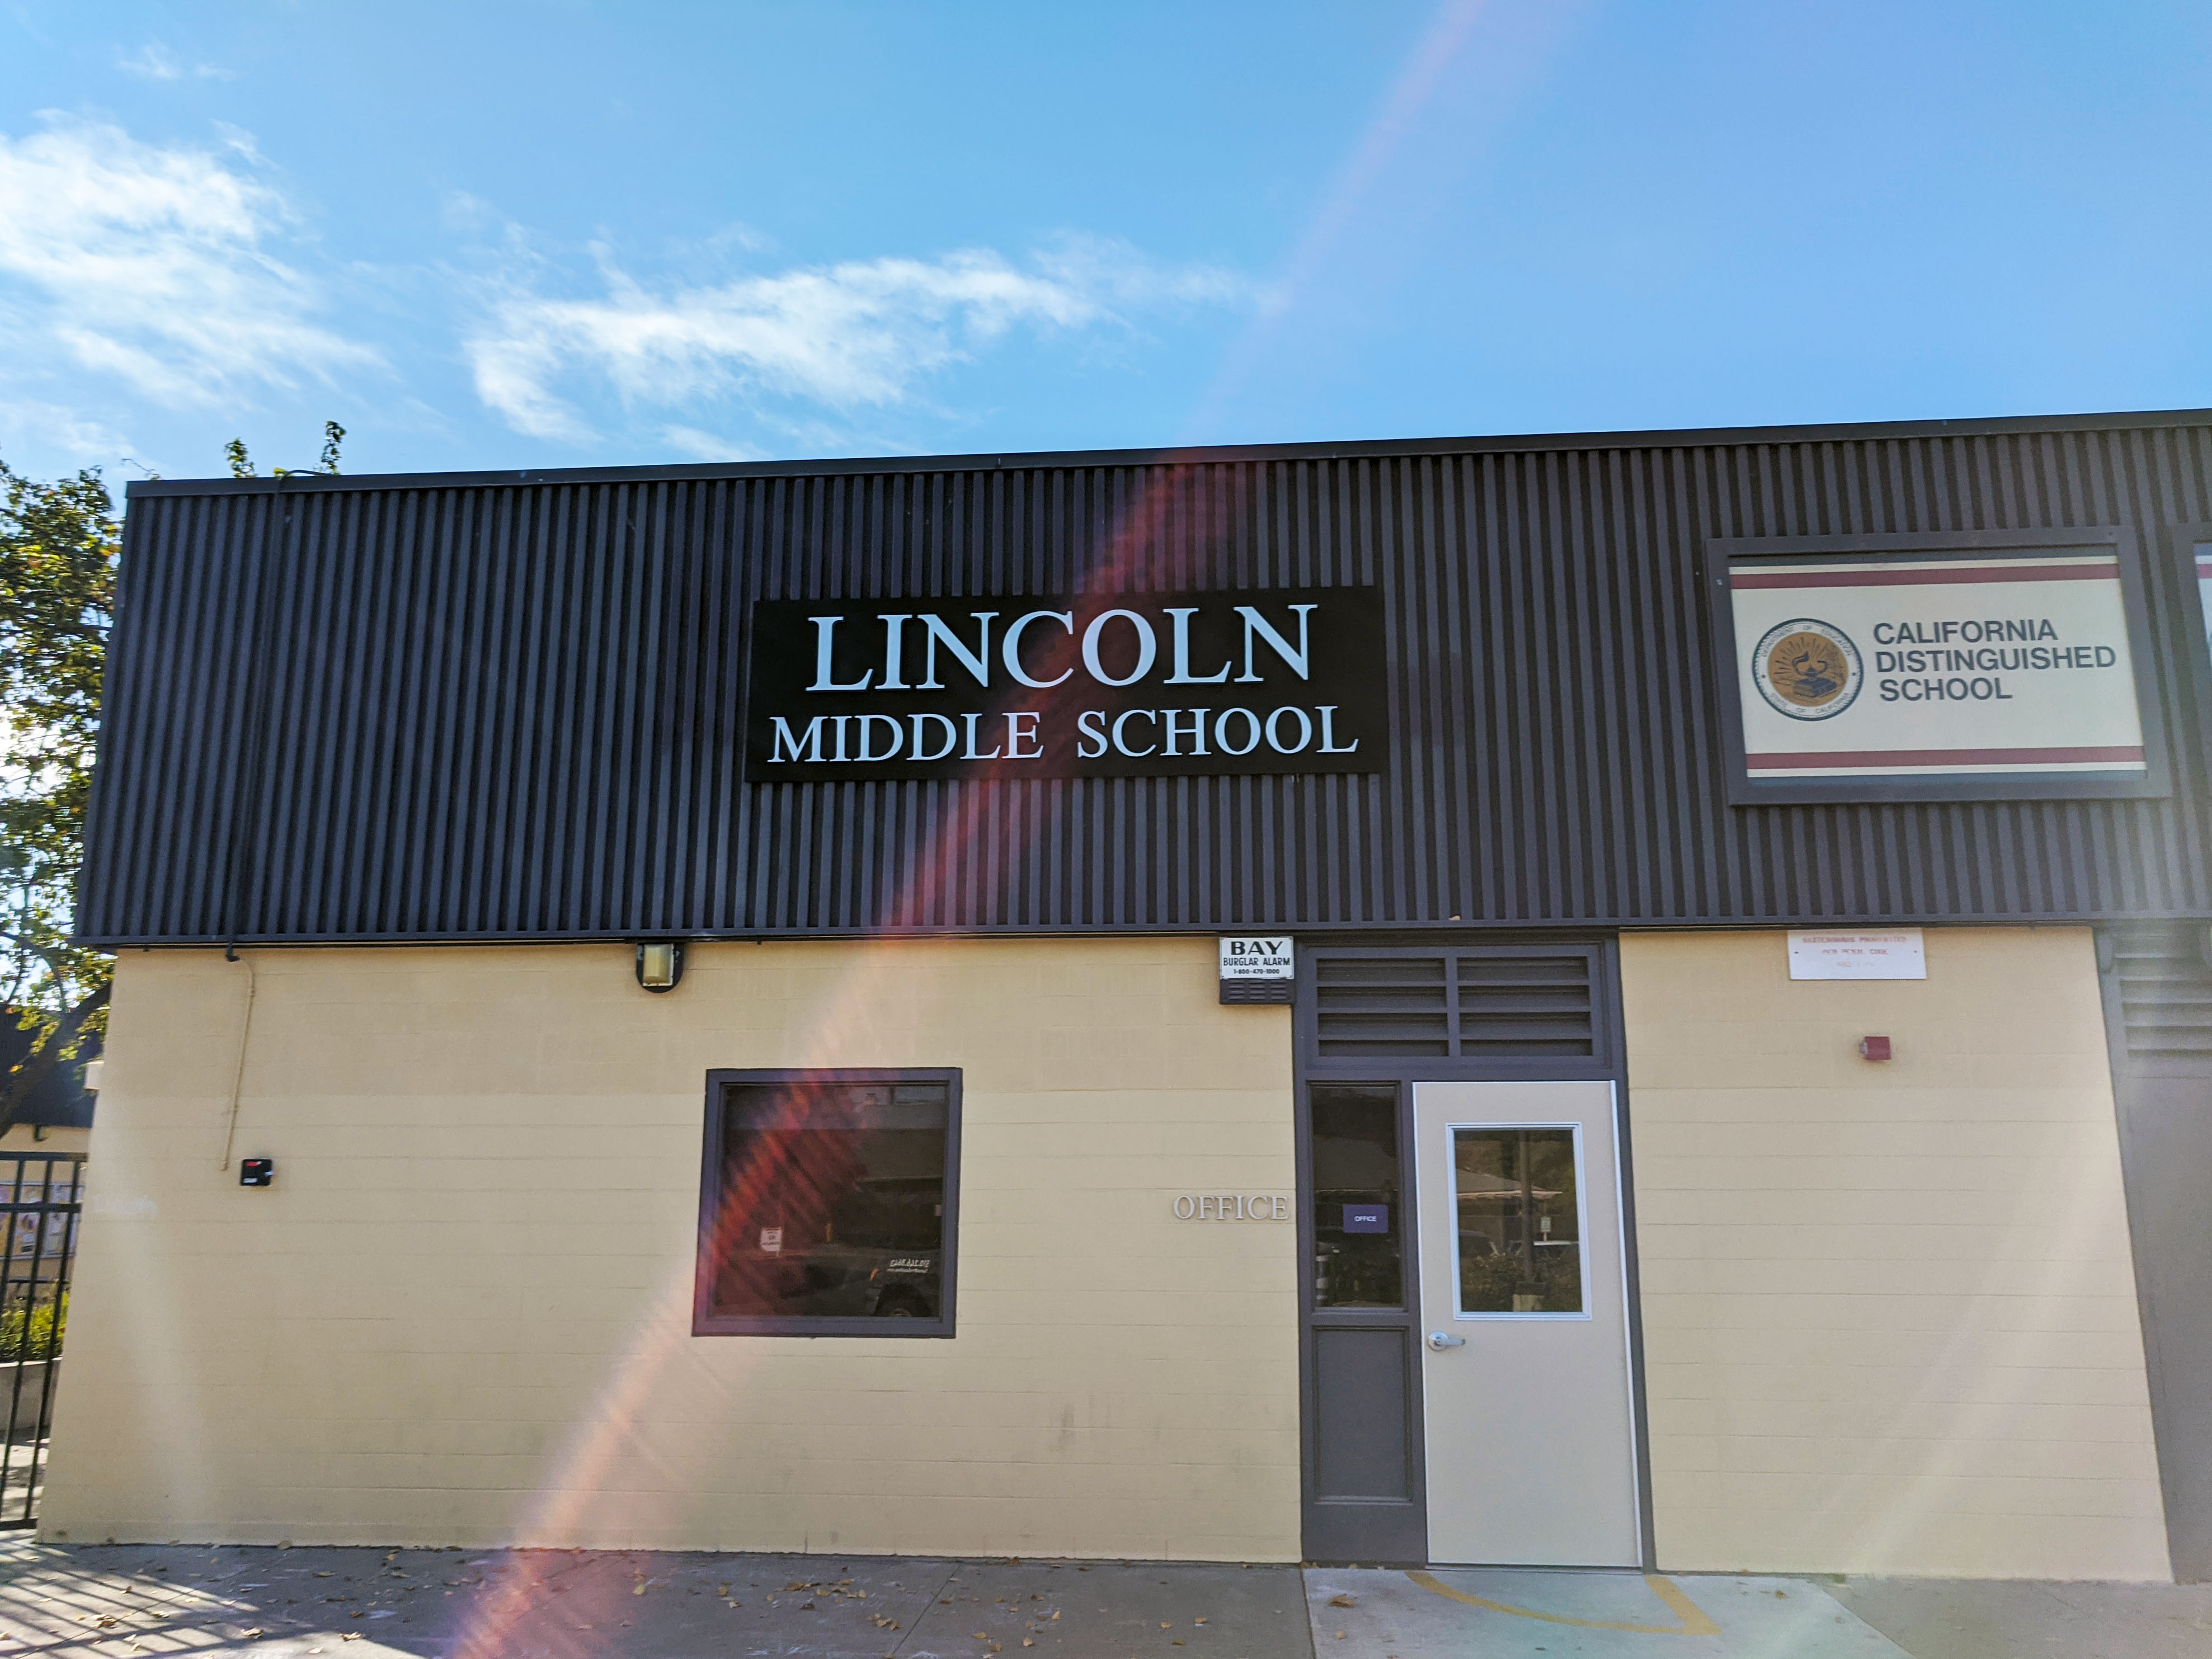 Lincoln middle school signage